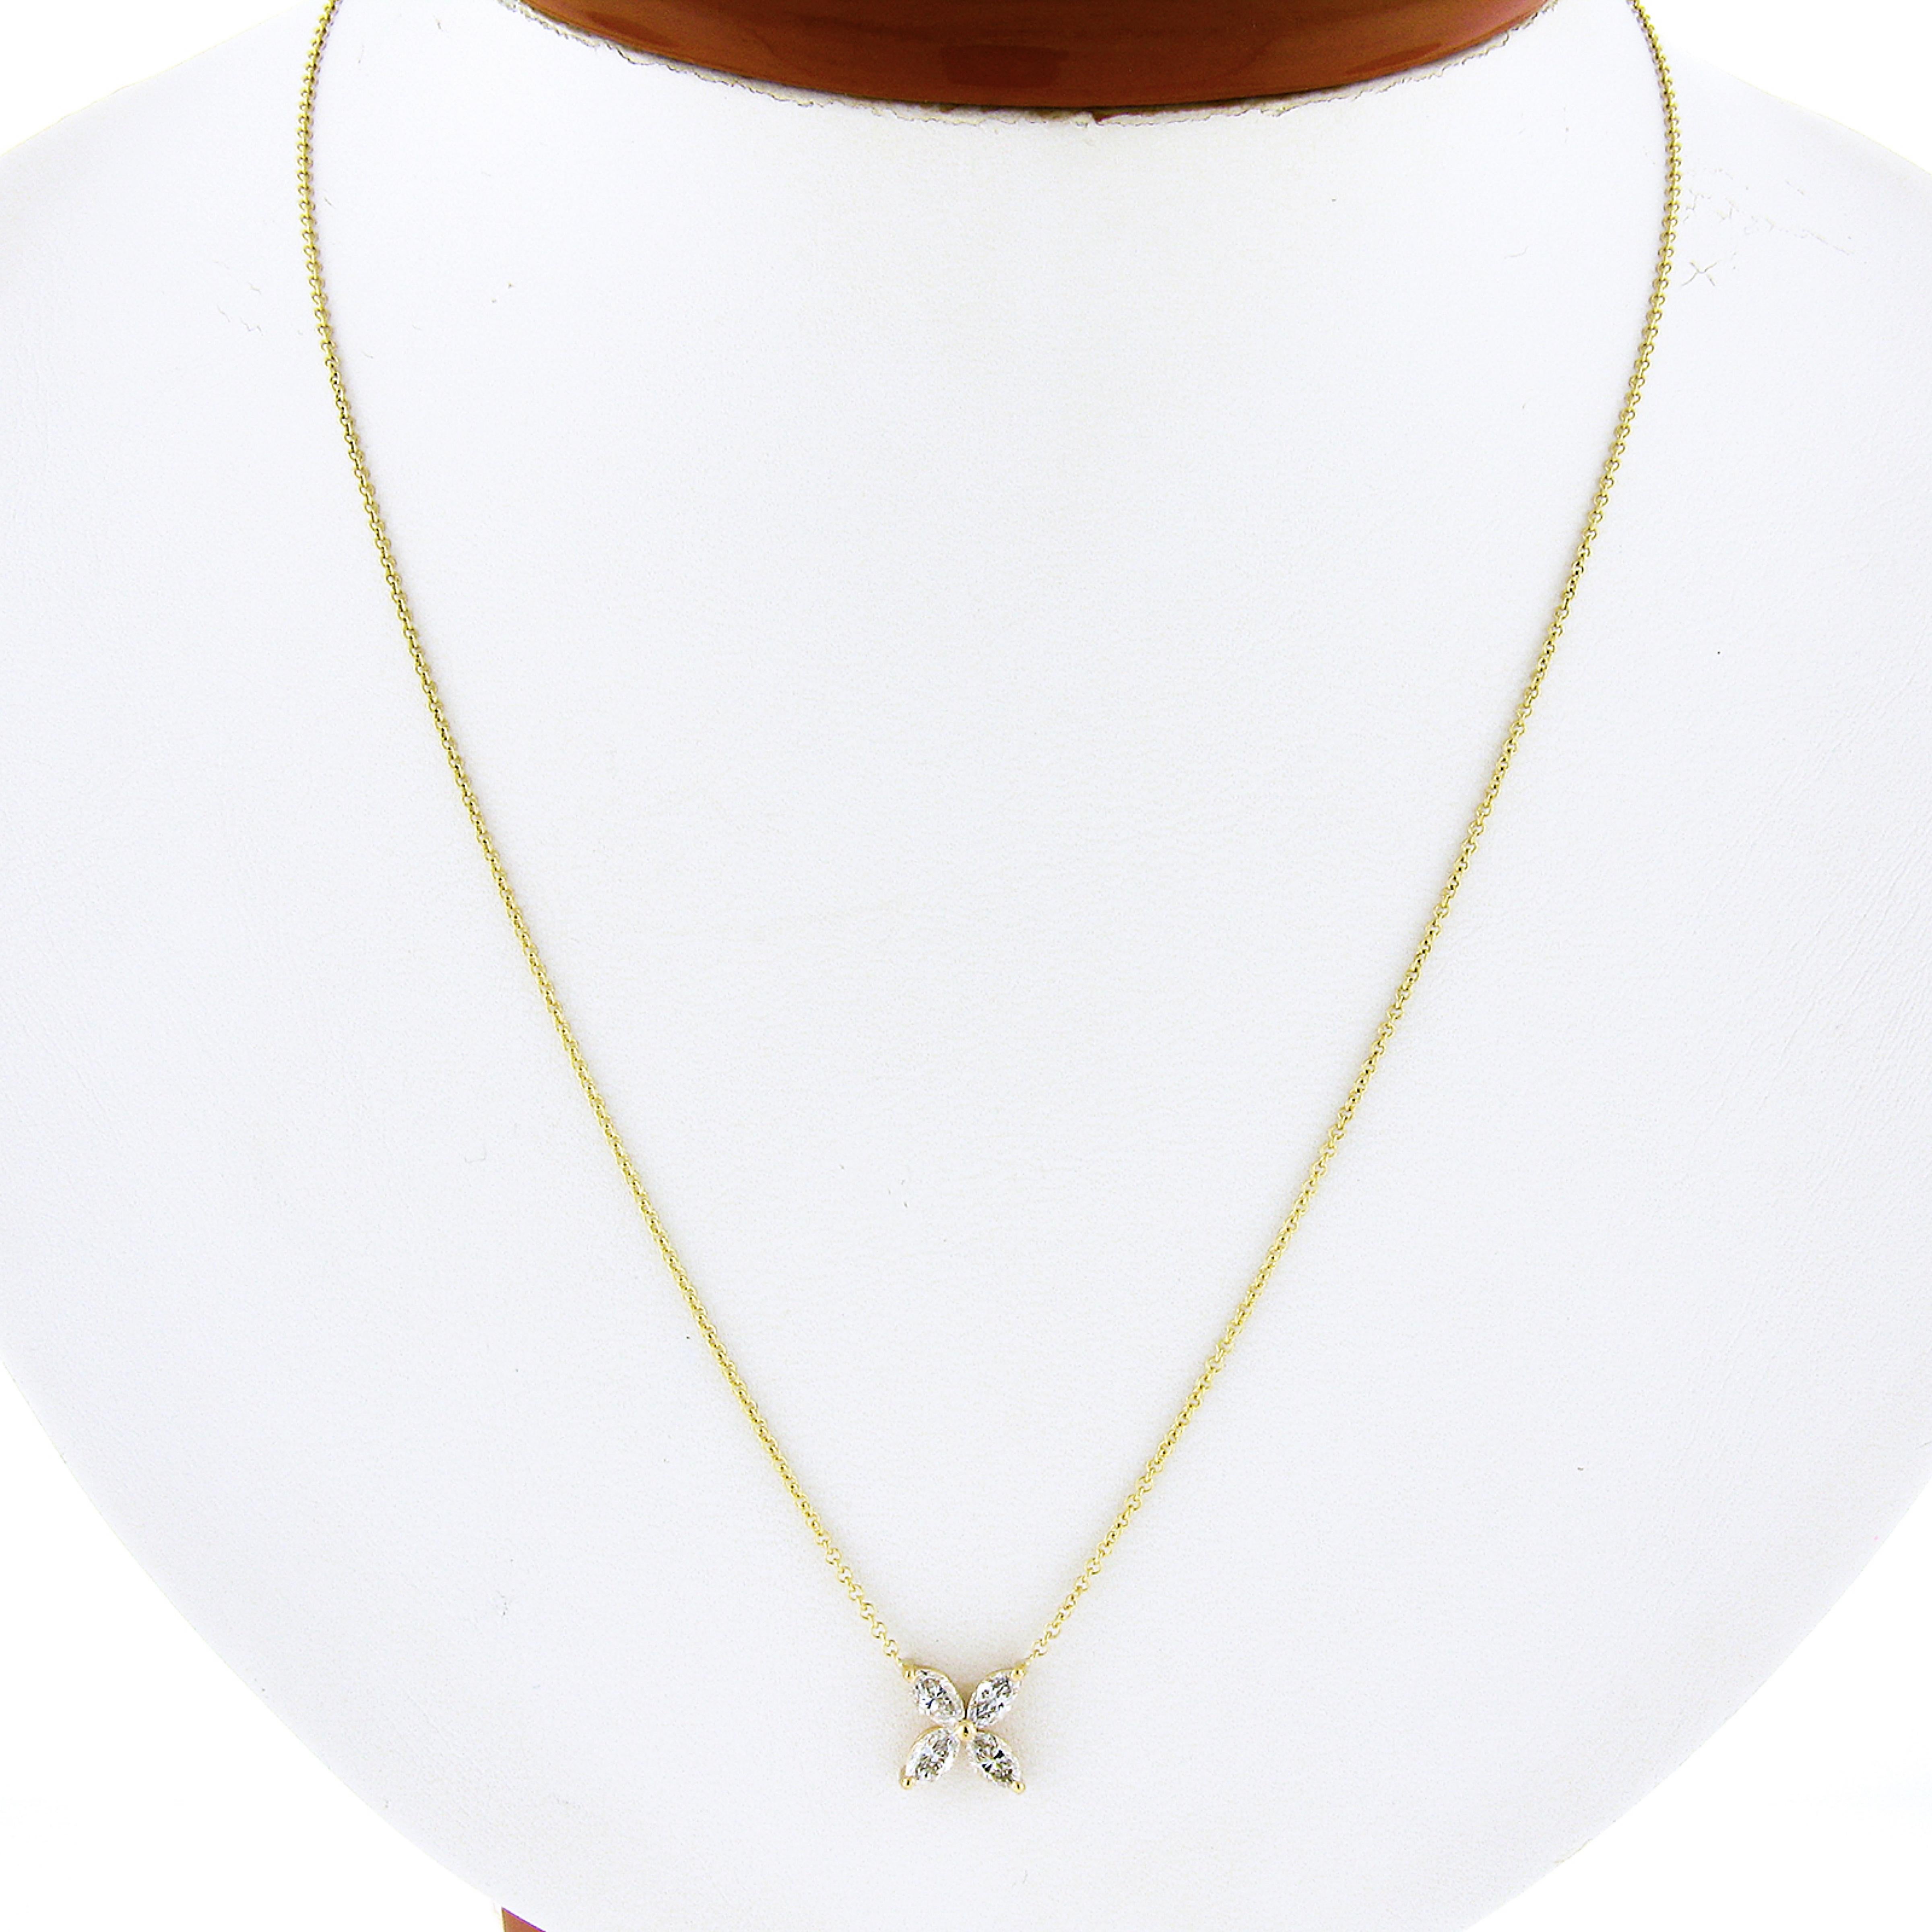 This gorgeous pendant necklace is newly crafted in solid 18k yellow gold, and features a lovely flower-shaped pendant that consists of 4 marquise cut diamonds.  The fiery diamonds are perfectly prong set on an open basket setting, and total 0.56